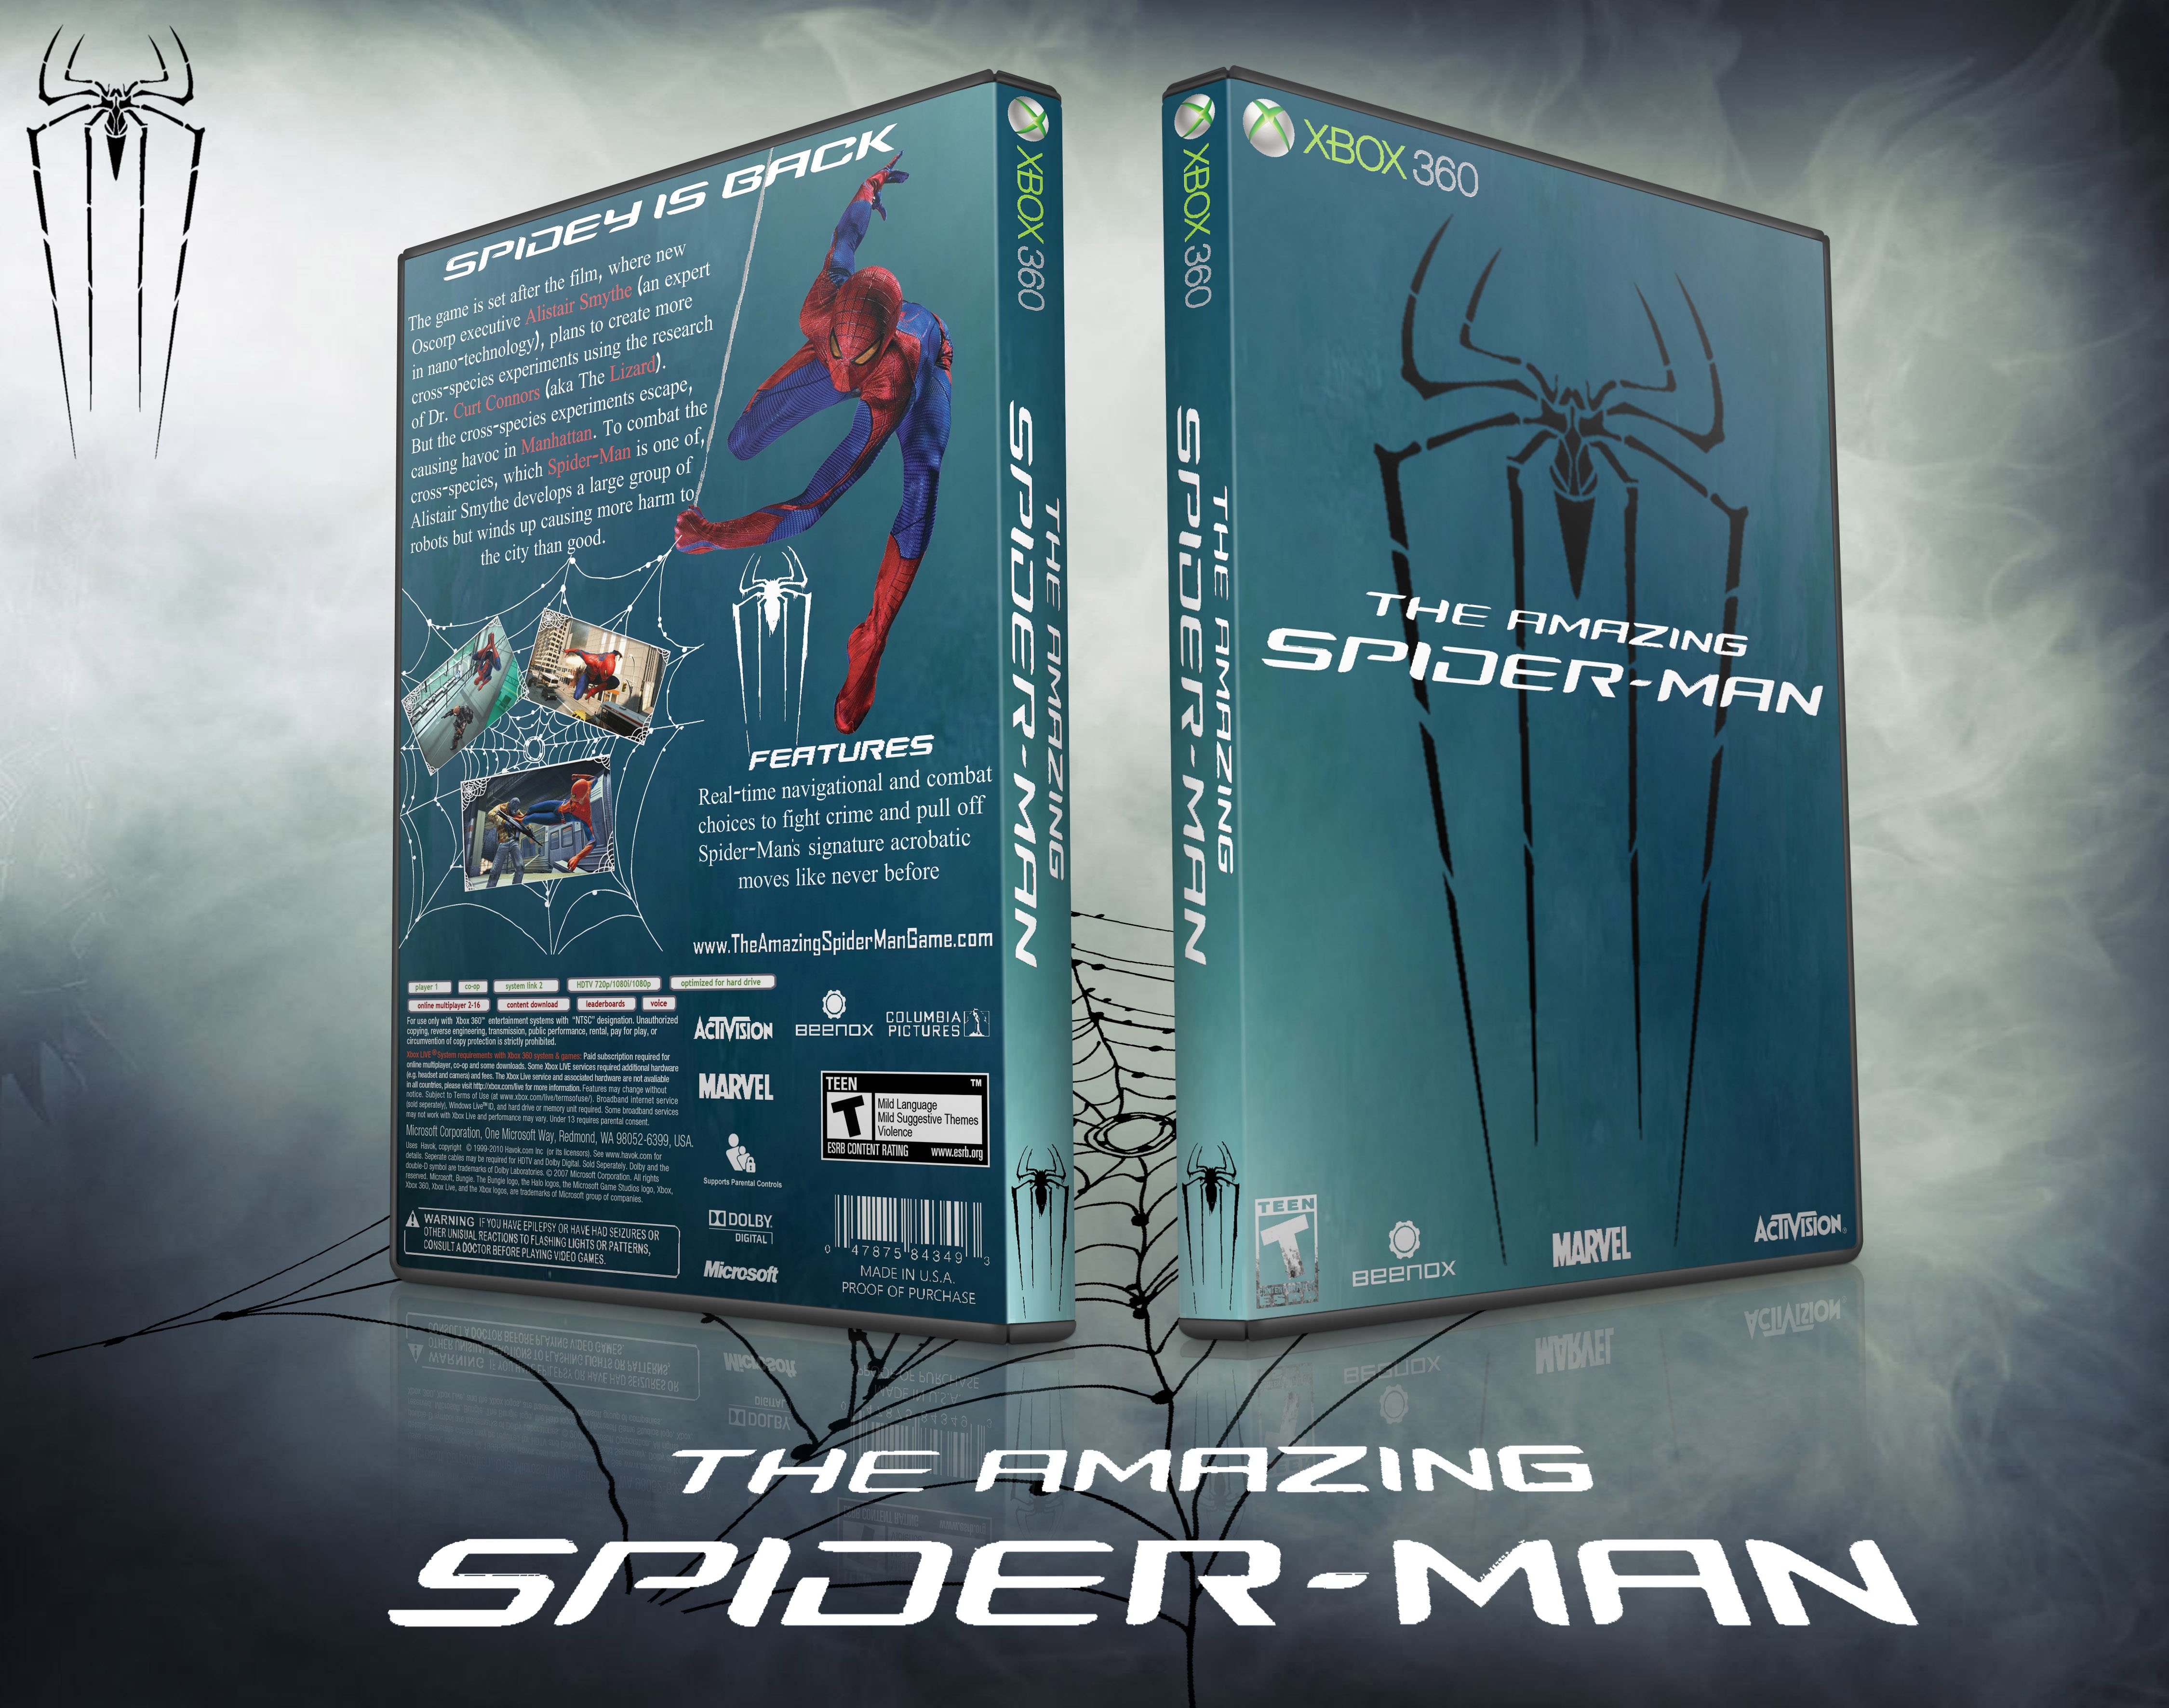 The Amazing Spider-Man box cover